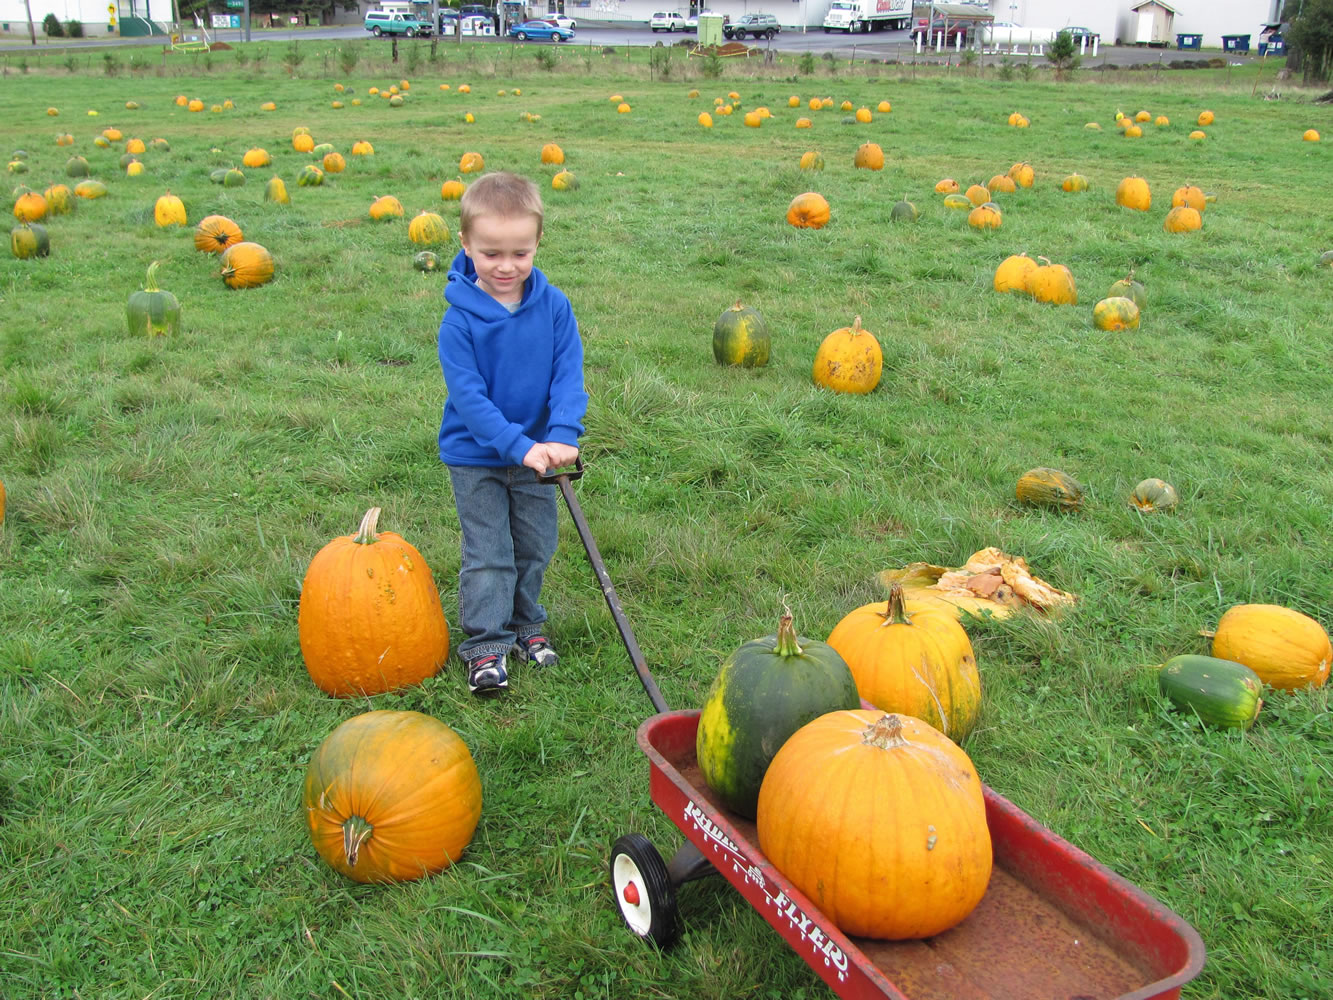 Selecting just the right pumpkin is a challenge for many.